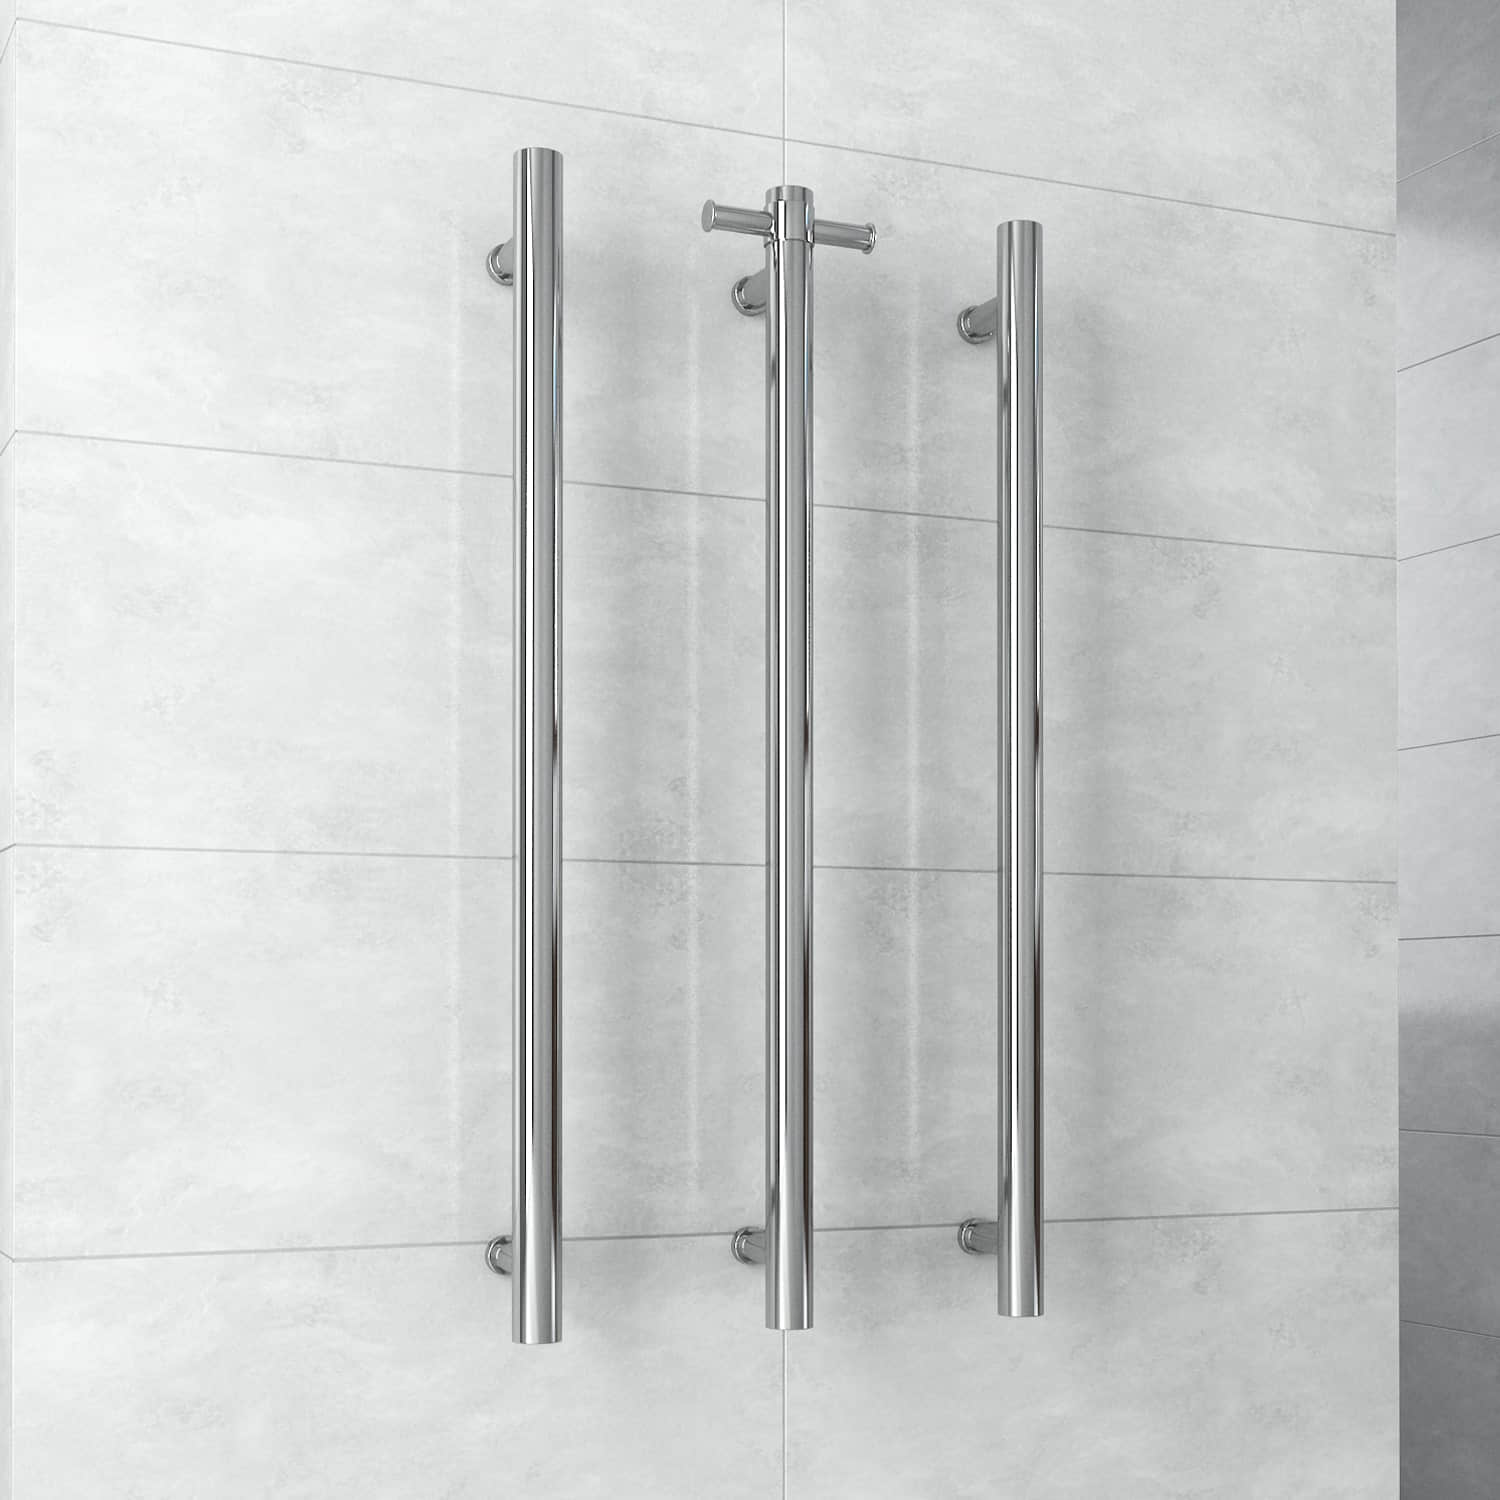 Single heated towel rail from Infinity Plus bathrooms deliver AU wide